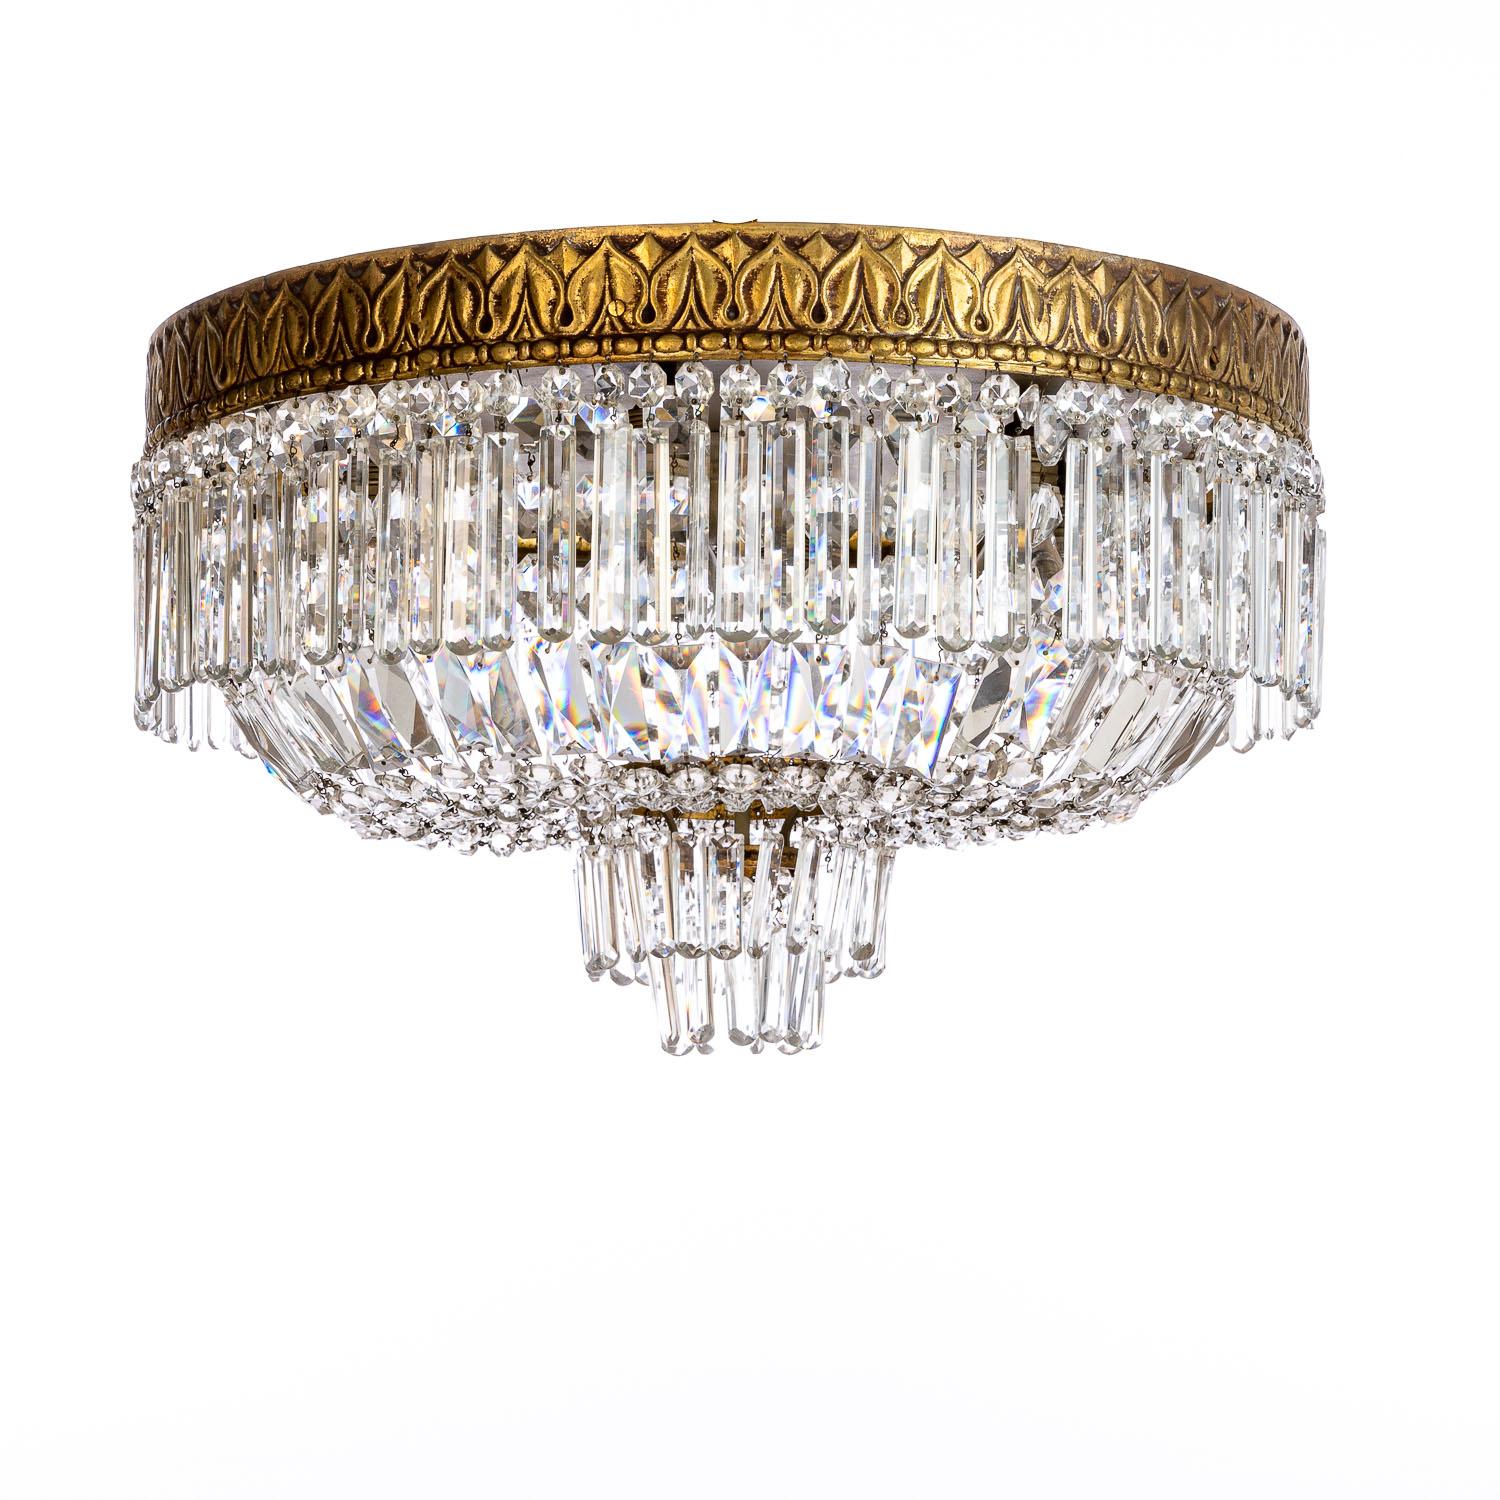 1940's Italian Brass & Crystal Glass Flush Mount In Good Condition For Sale In Amsterdam, NH